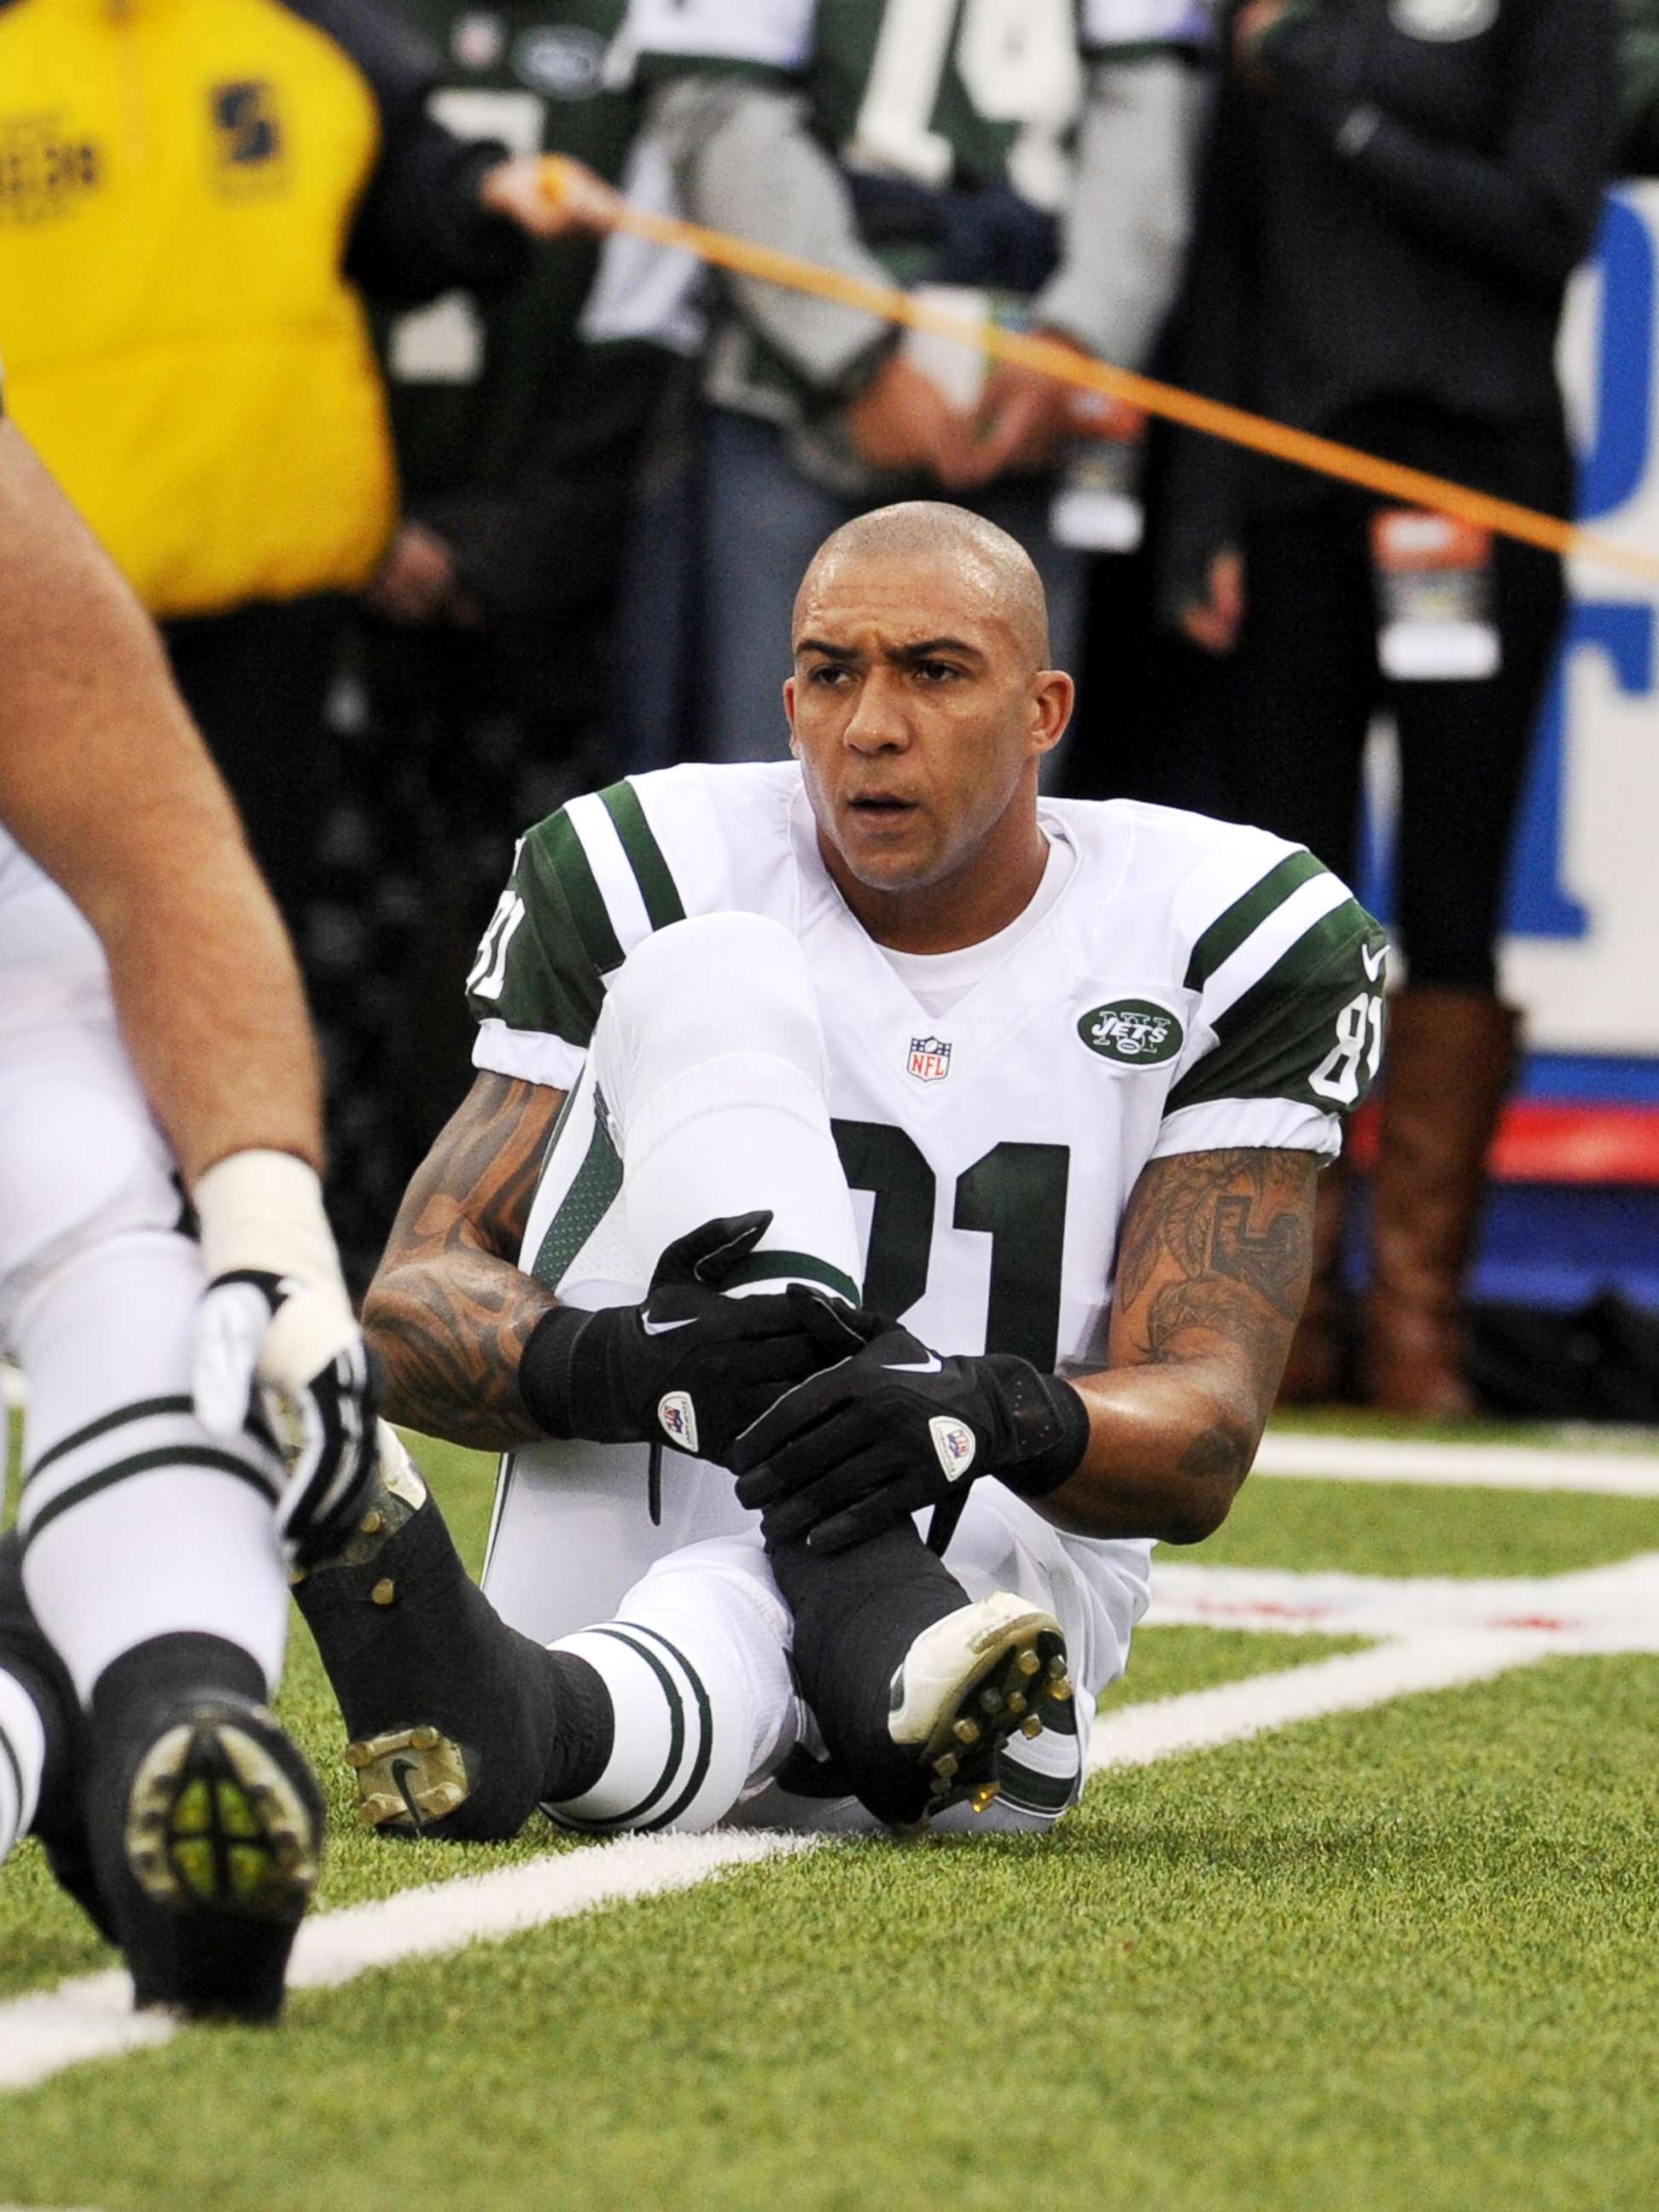 PHOTO: Tight end Kellen Winslow of the New York Jets stretches during warm-ups prior to a game against the Buffalo Bills at Ralph Wilson Stadium in Orchard Park, New York, Nov. 17, 2013.